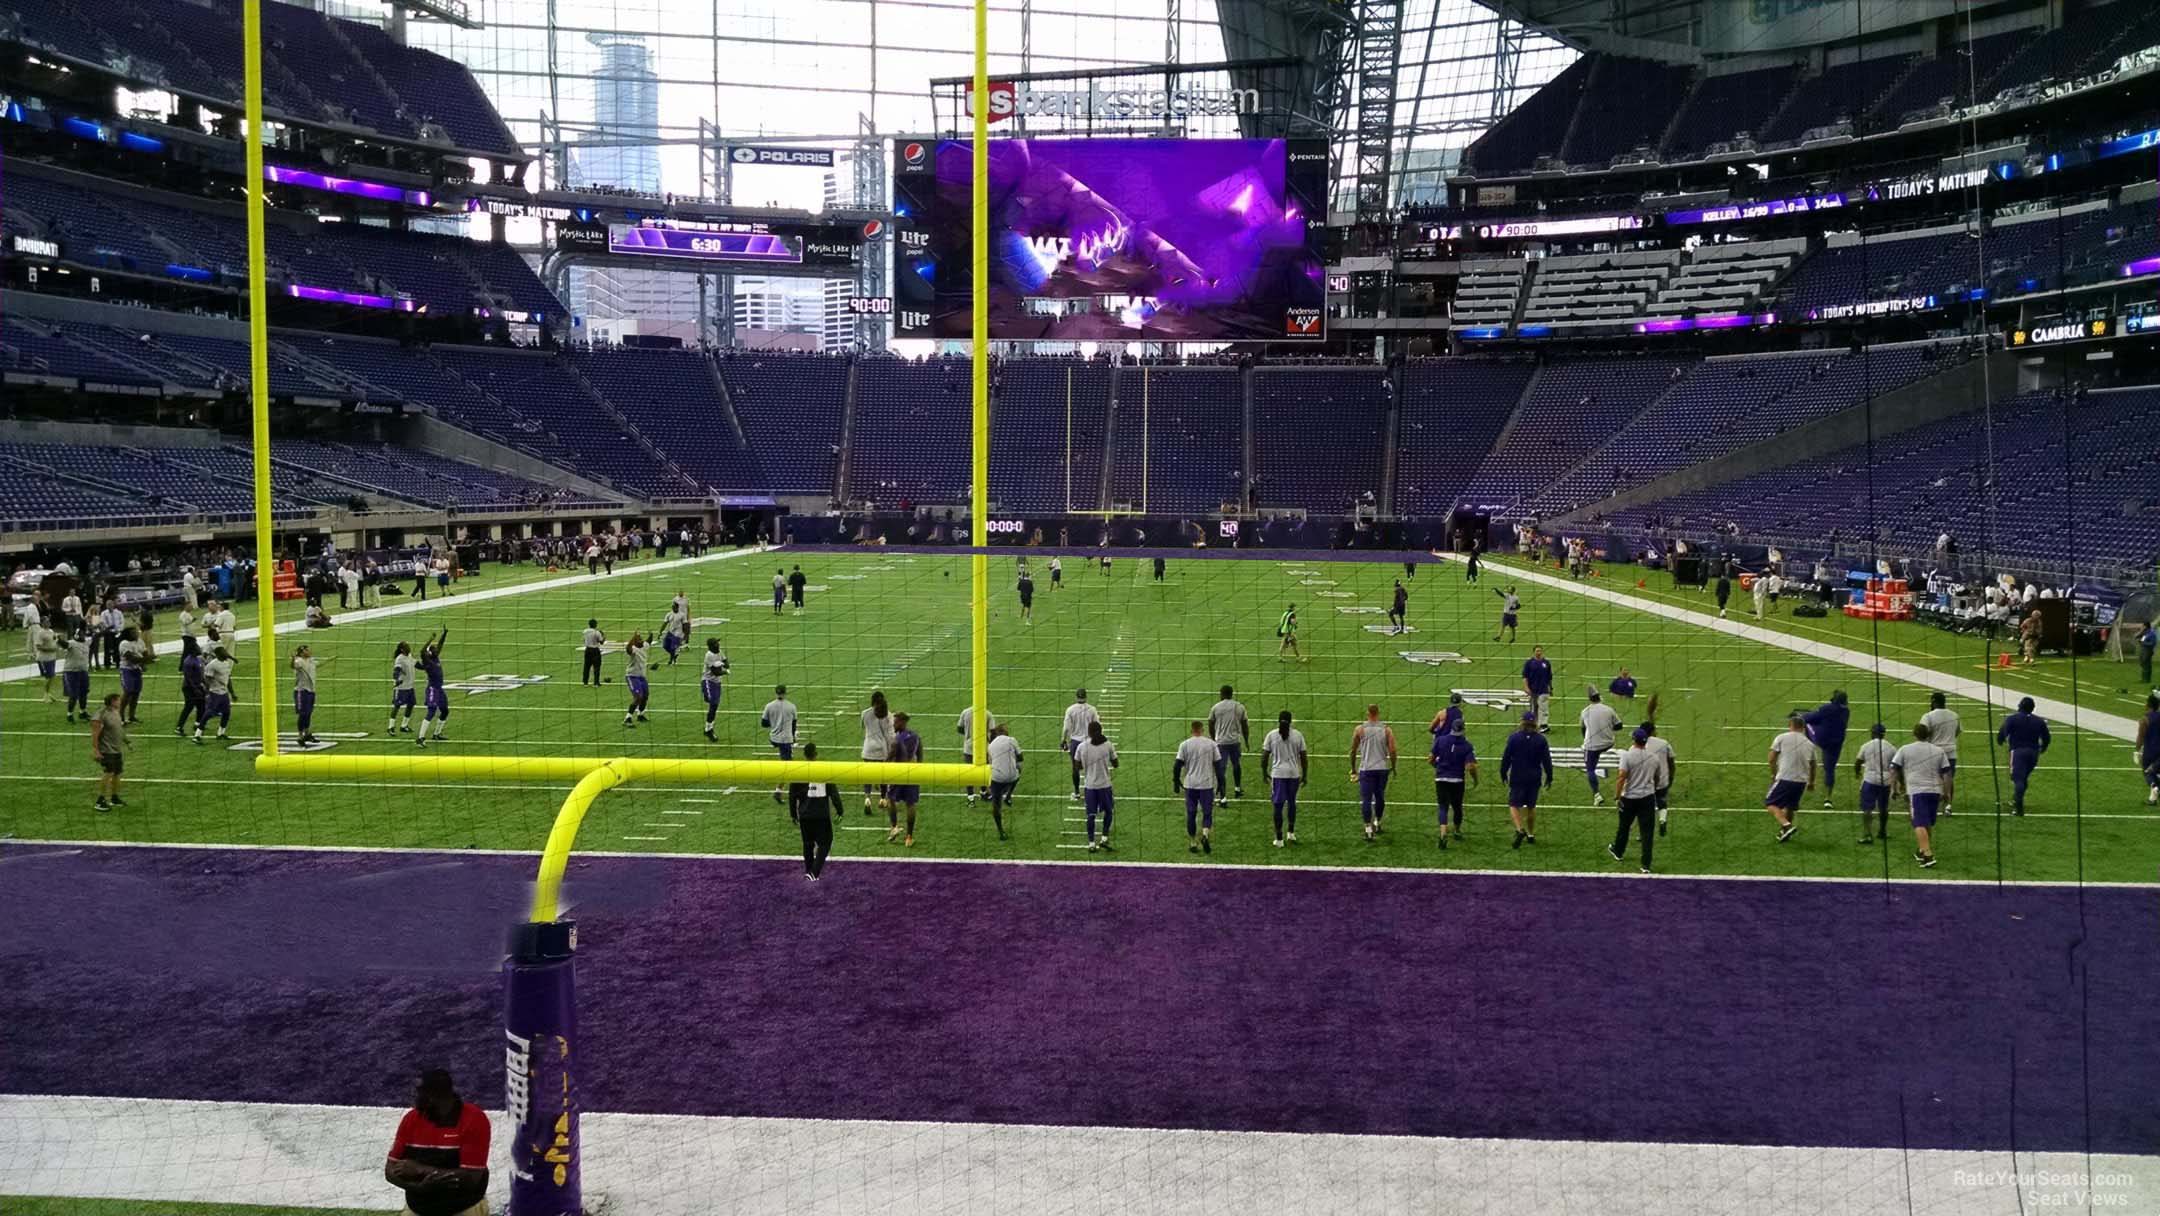 section 119, row 5 seat view  for football - u.s. bank stadium